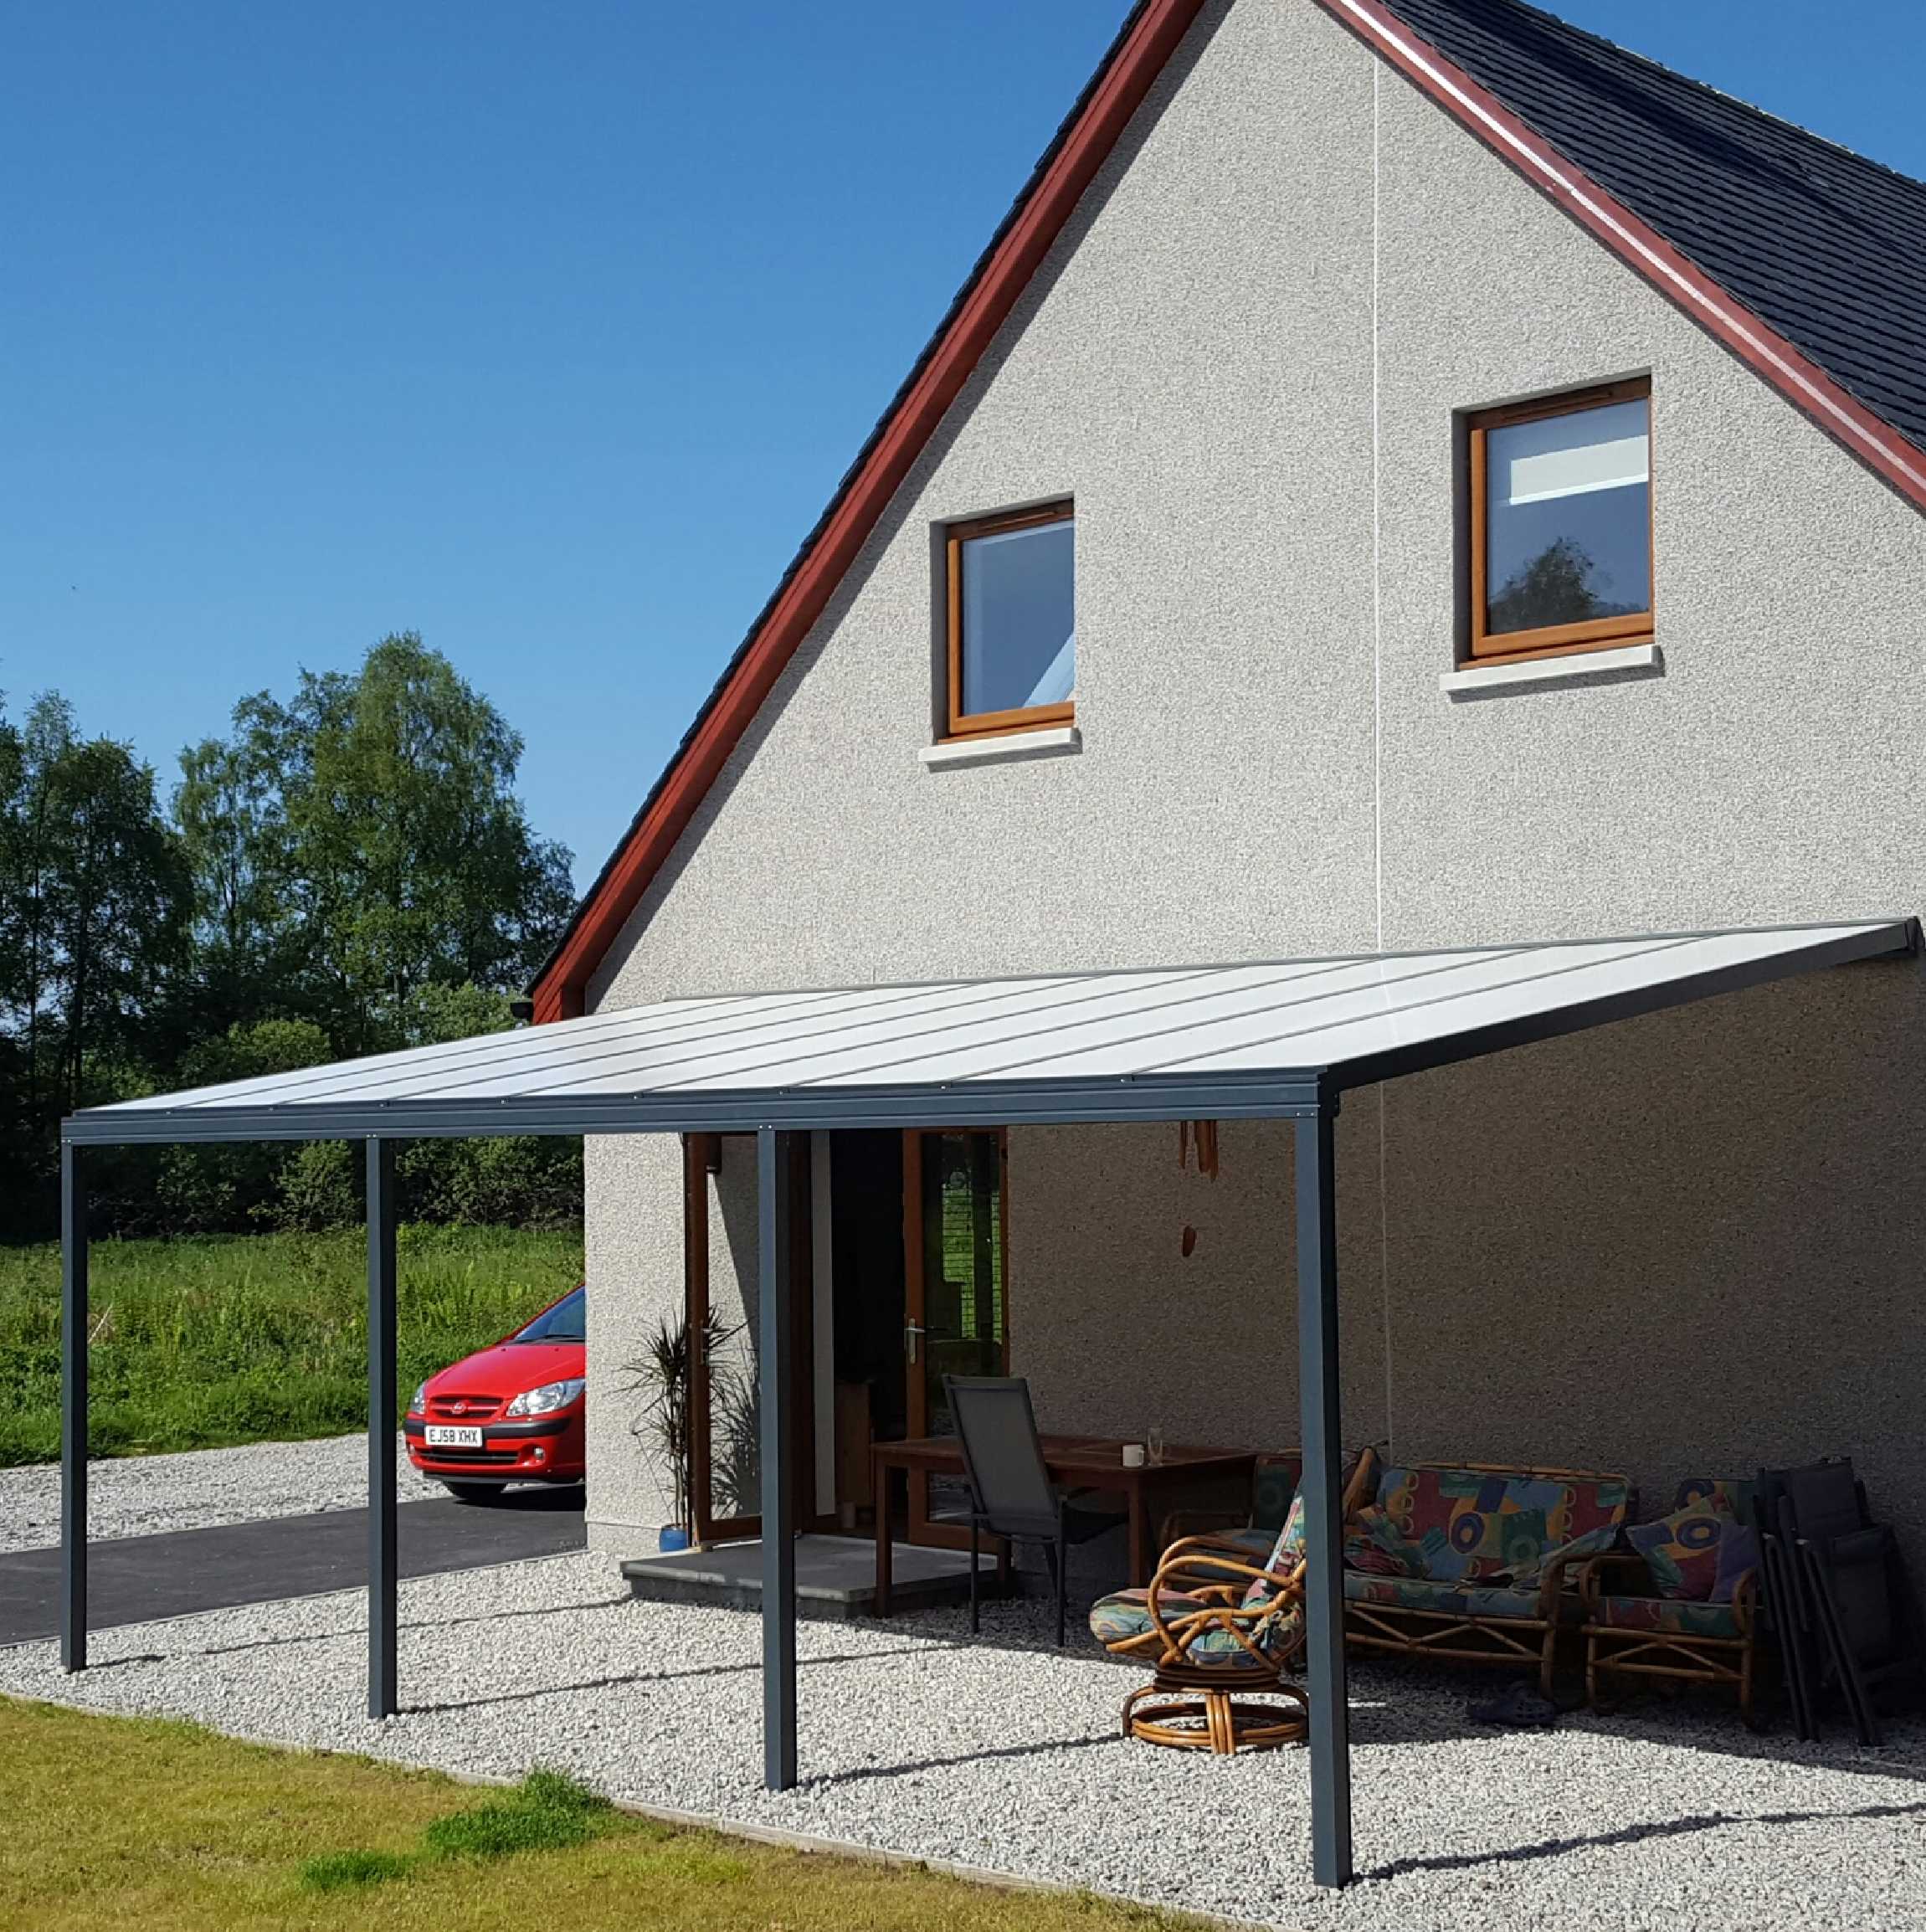 Great selection of Omega Smart Lean-To Canopy, Anthracite Grey, 16mm Polycarbonate Glazing - 4.9m (W) x 3.5m (P), (3) Supporting Posts